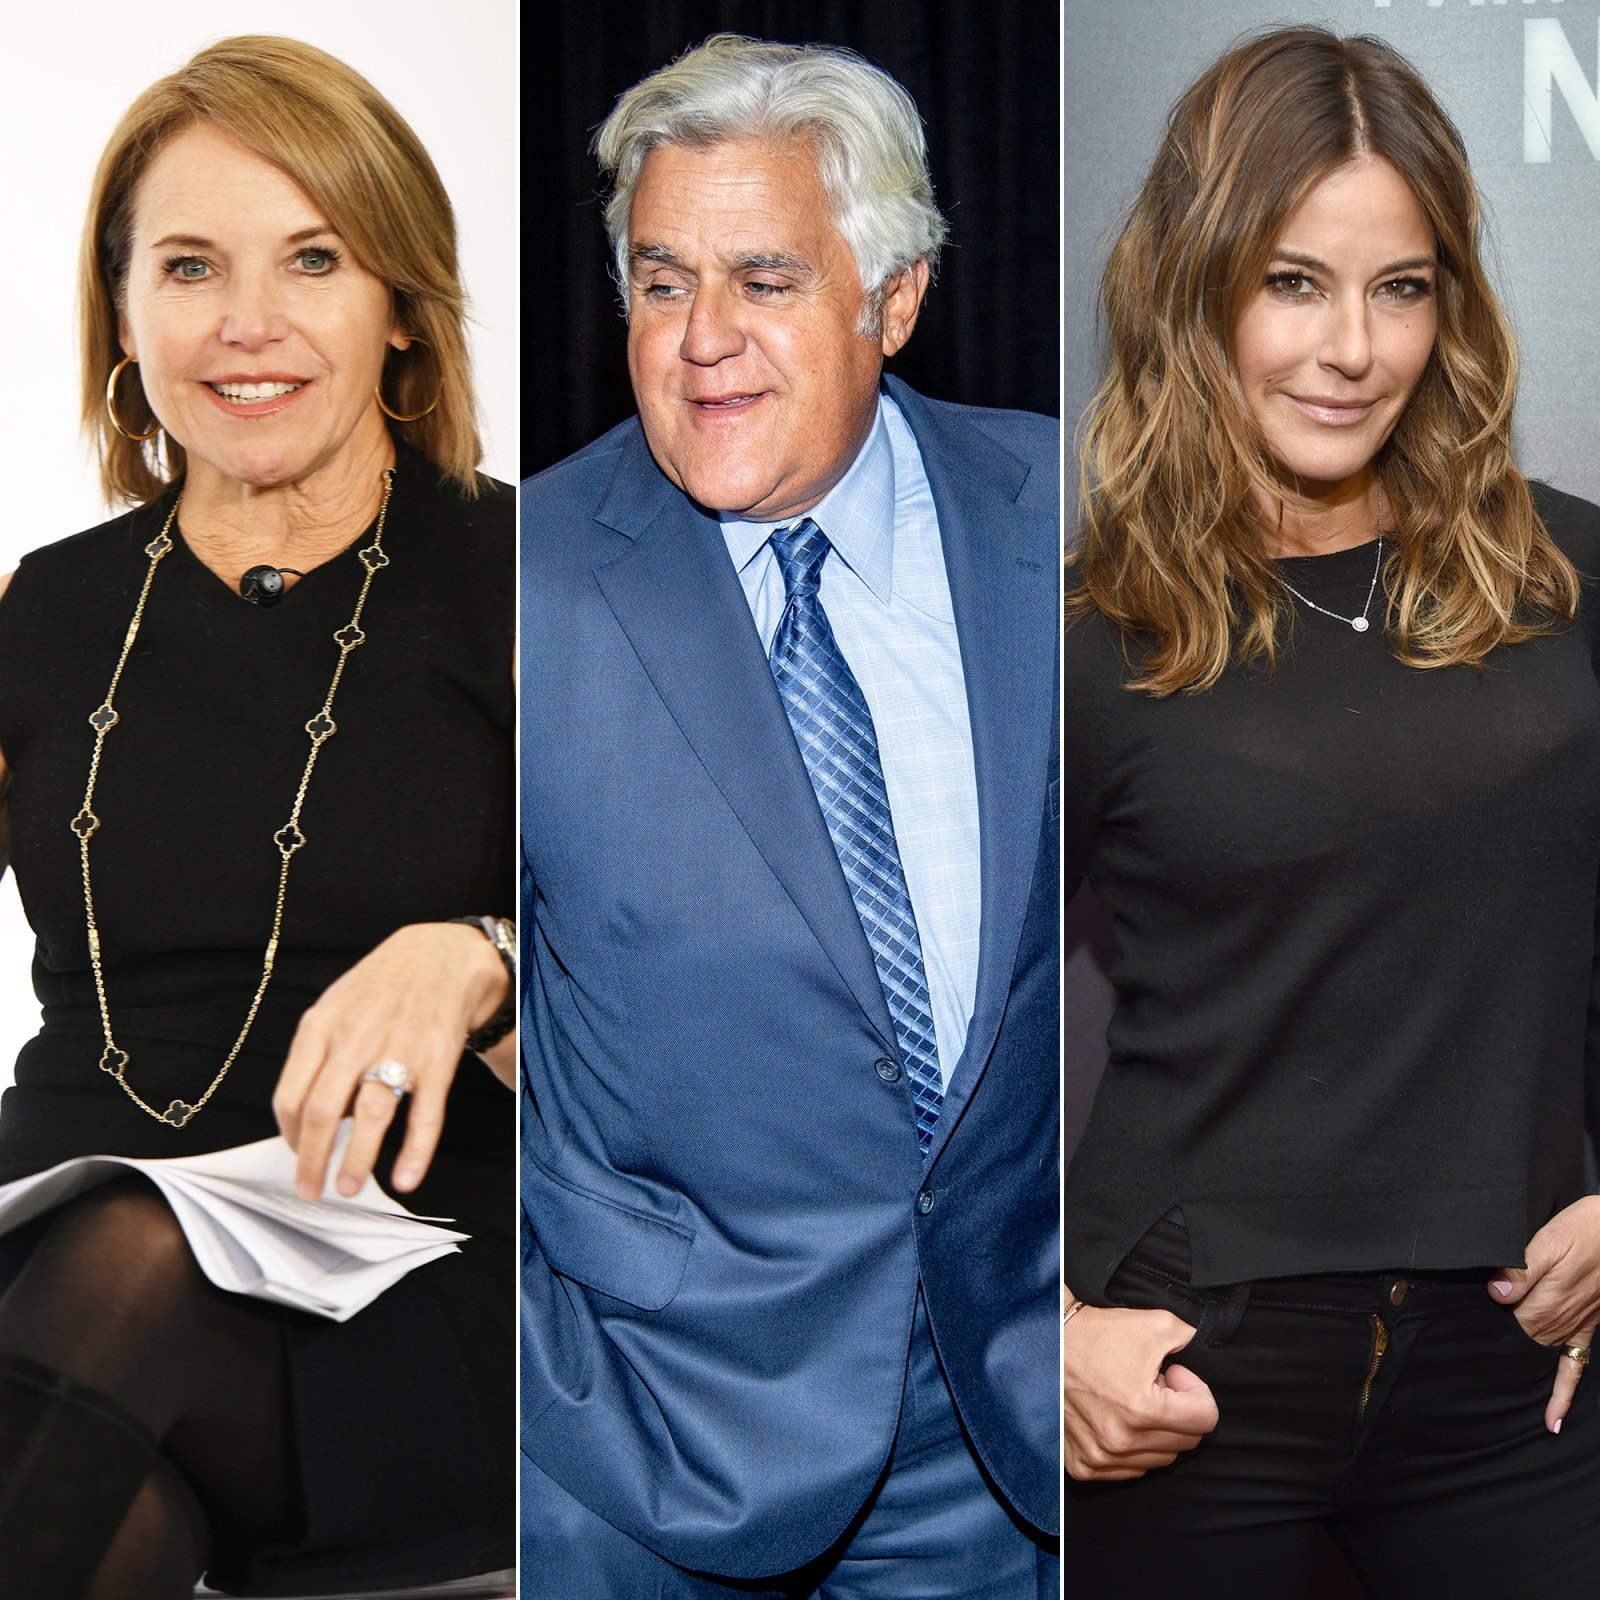 Katie Couric, Jay Leno and More Stars Still Reeling Over College Admissions Scandal